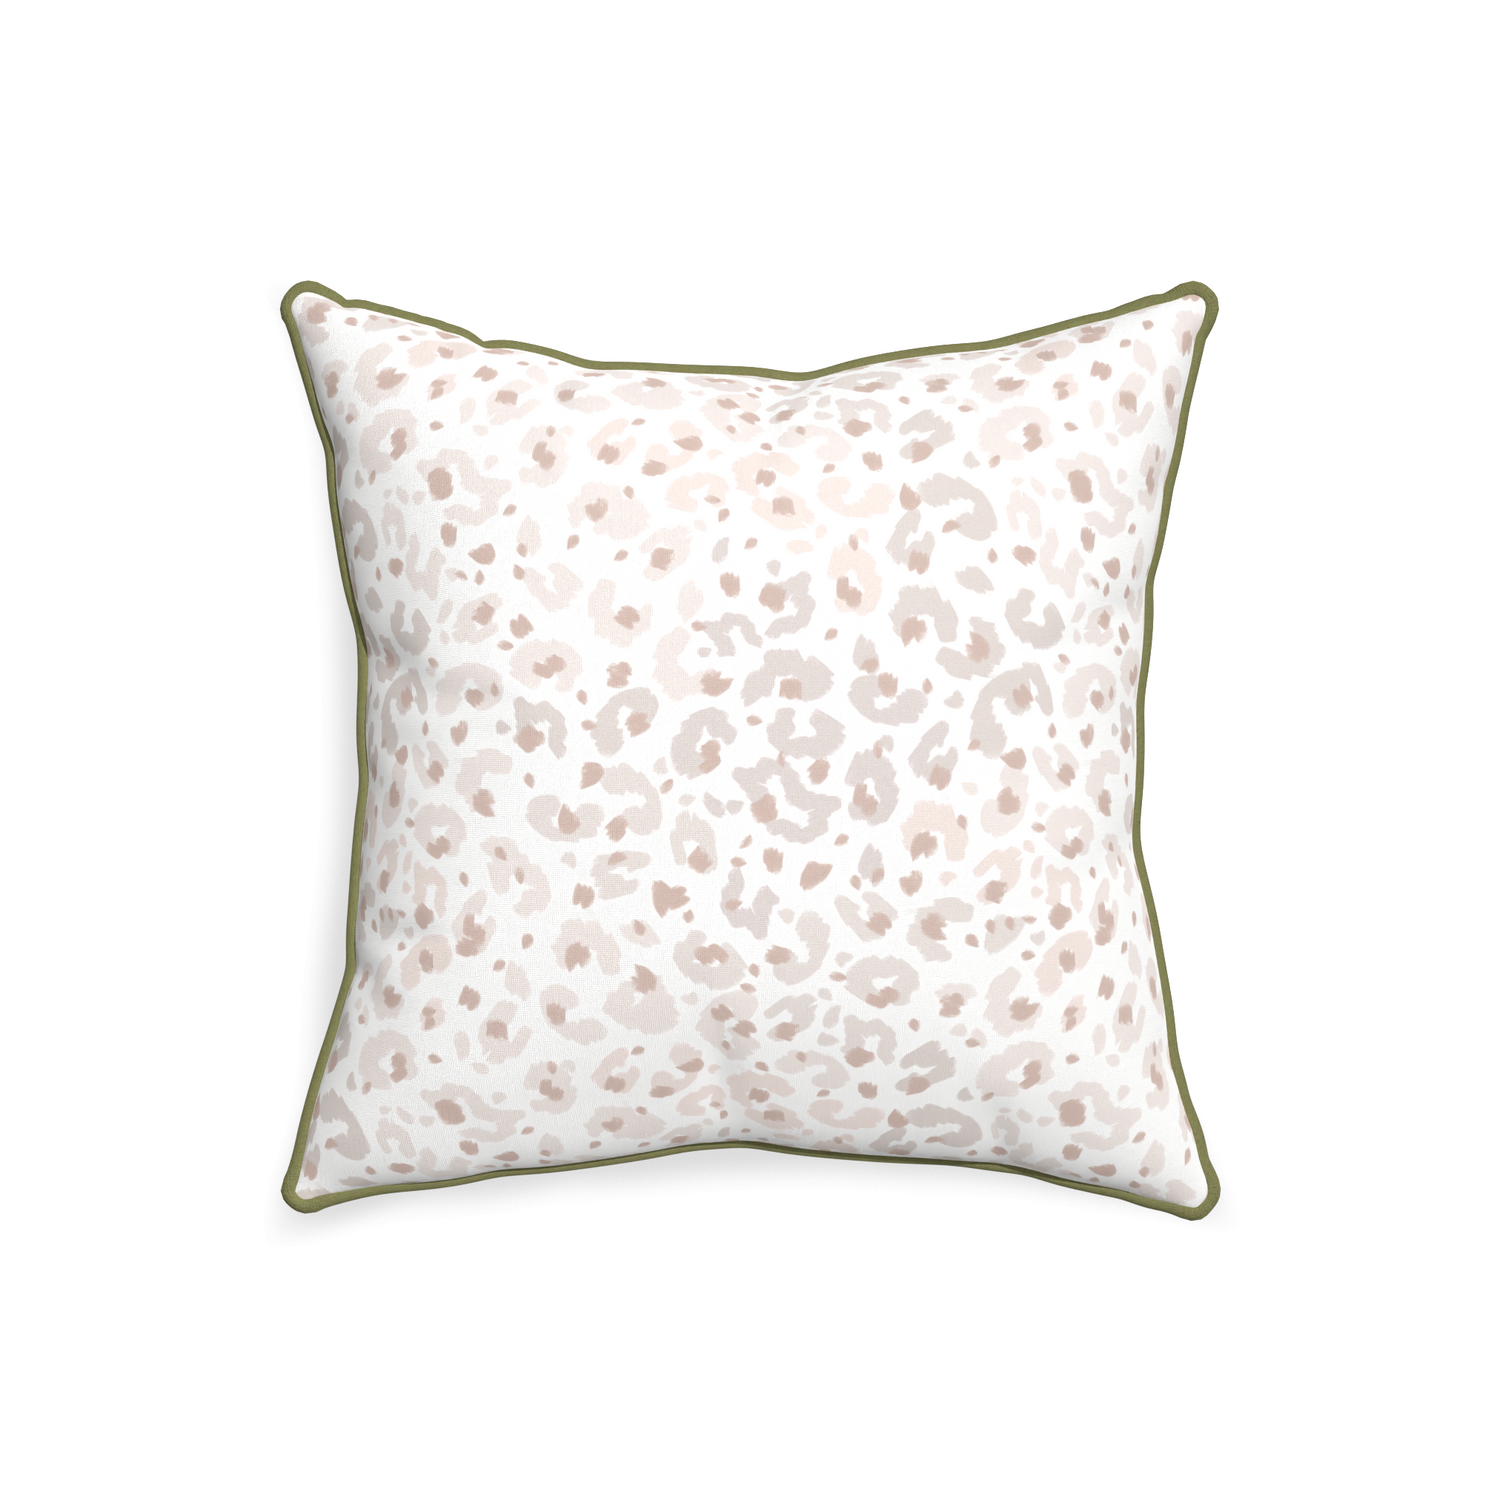 20-square rosie custom pillow with moss piping on white background